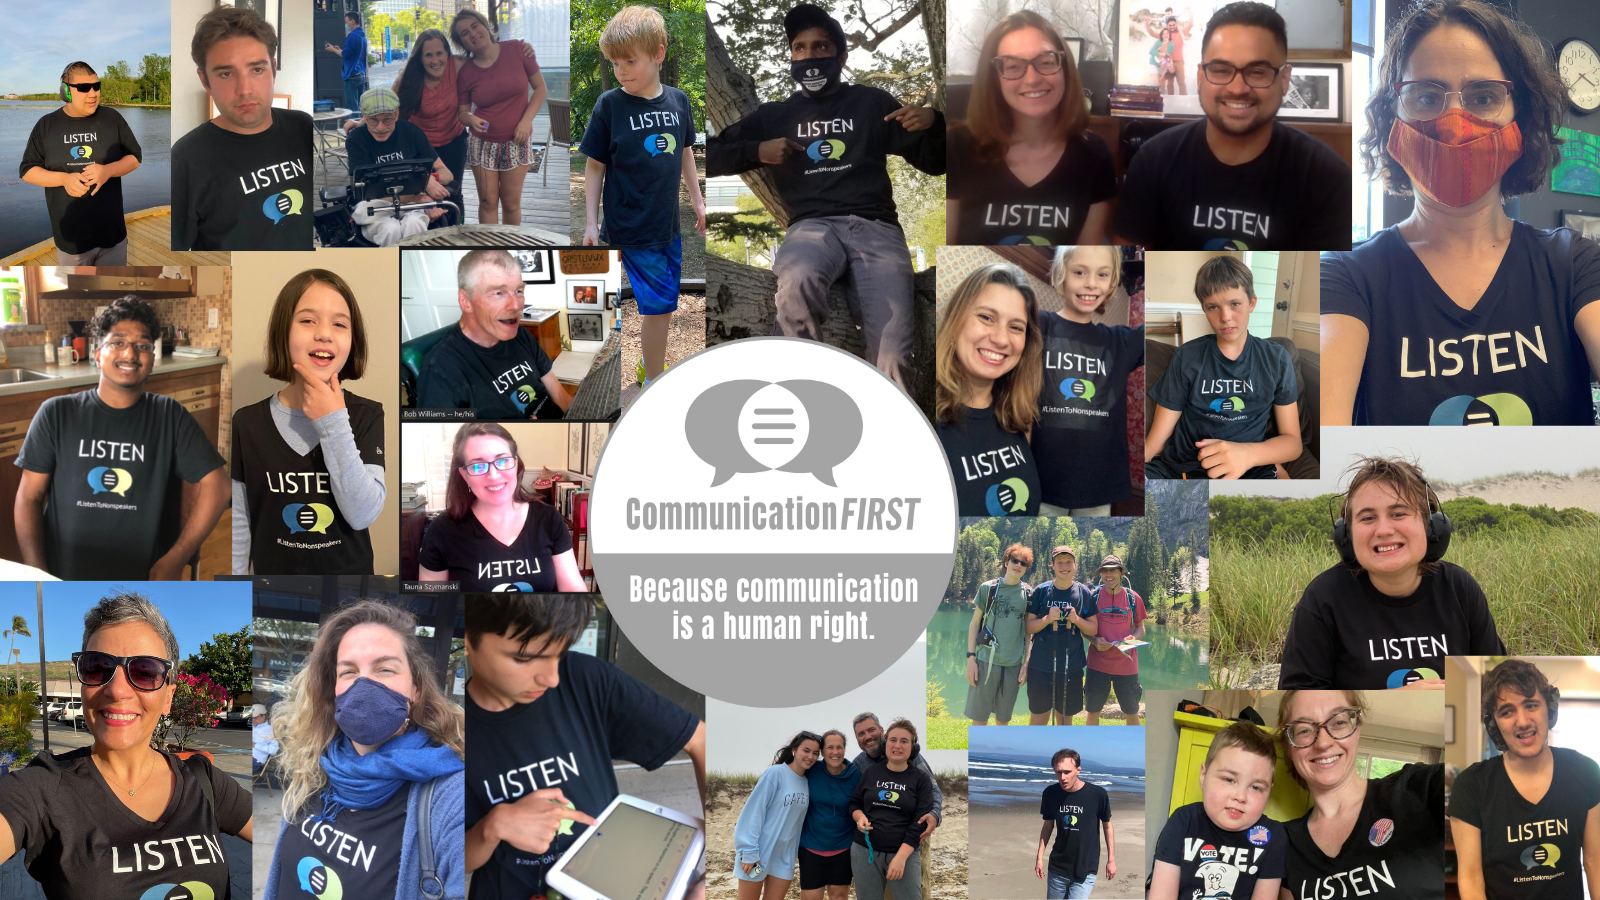 A collage of photos of diverse people wearing black LISTEN t-shirts with the CommunicationFIRST logo in grey and white in the center